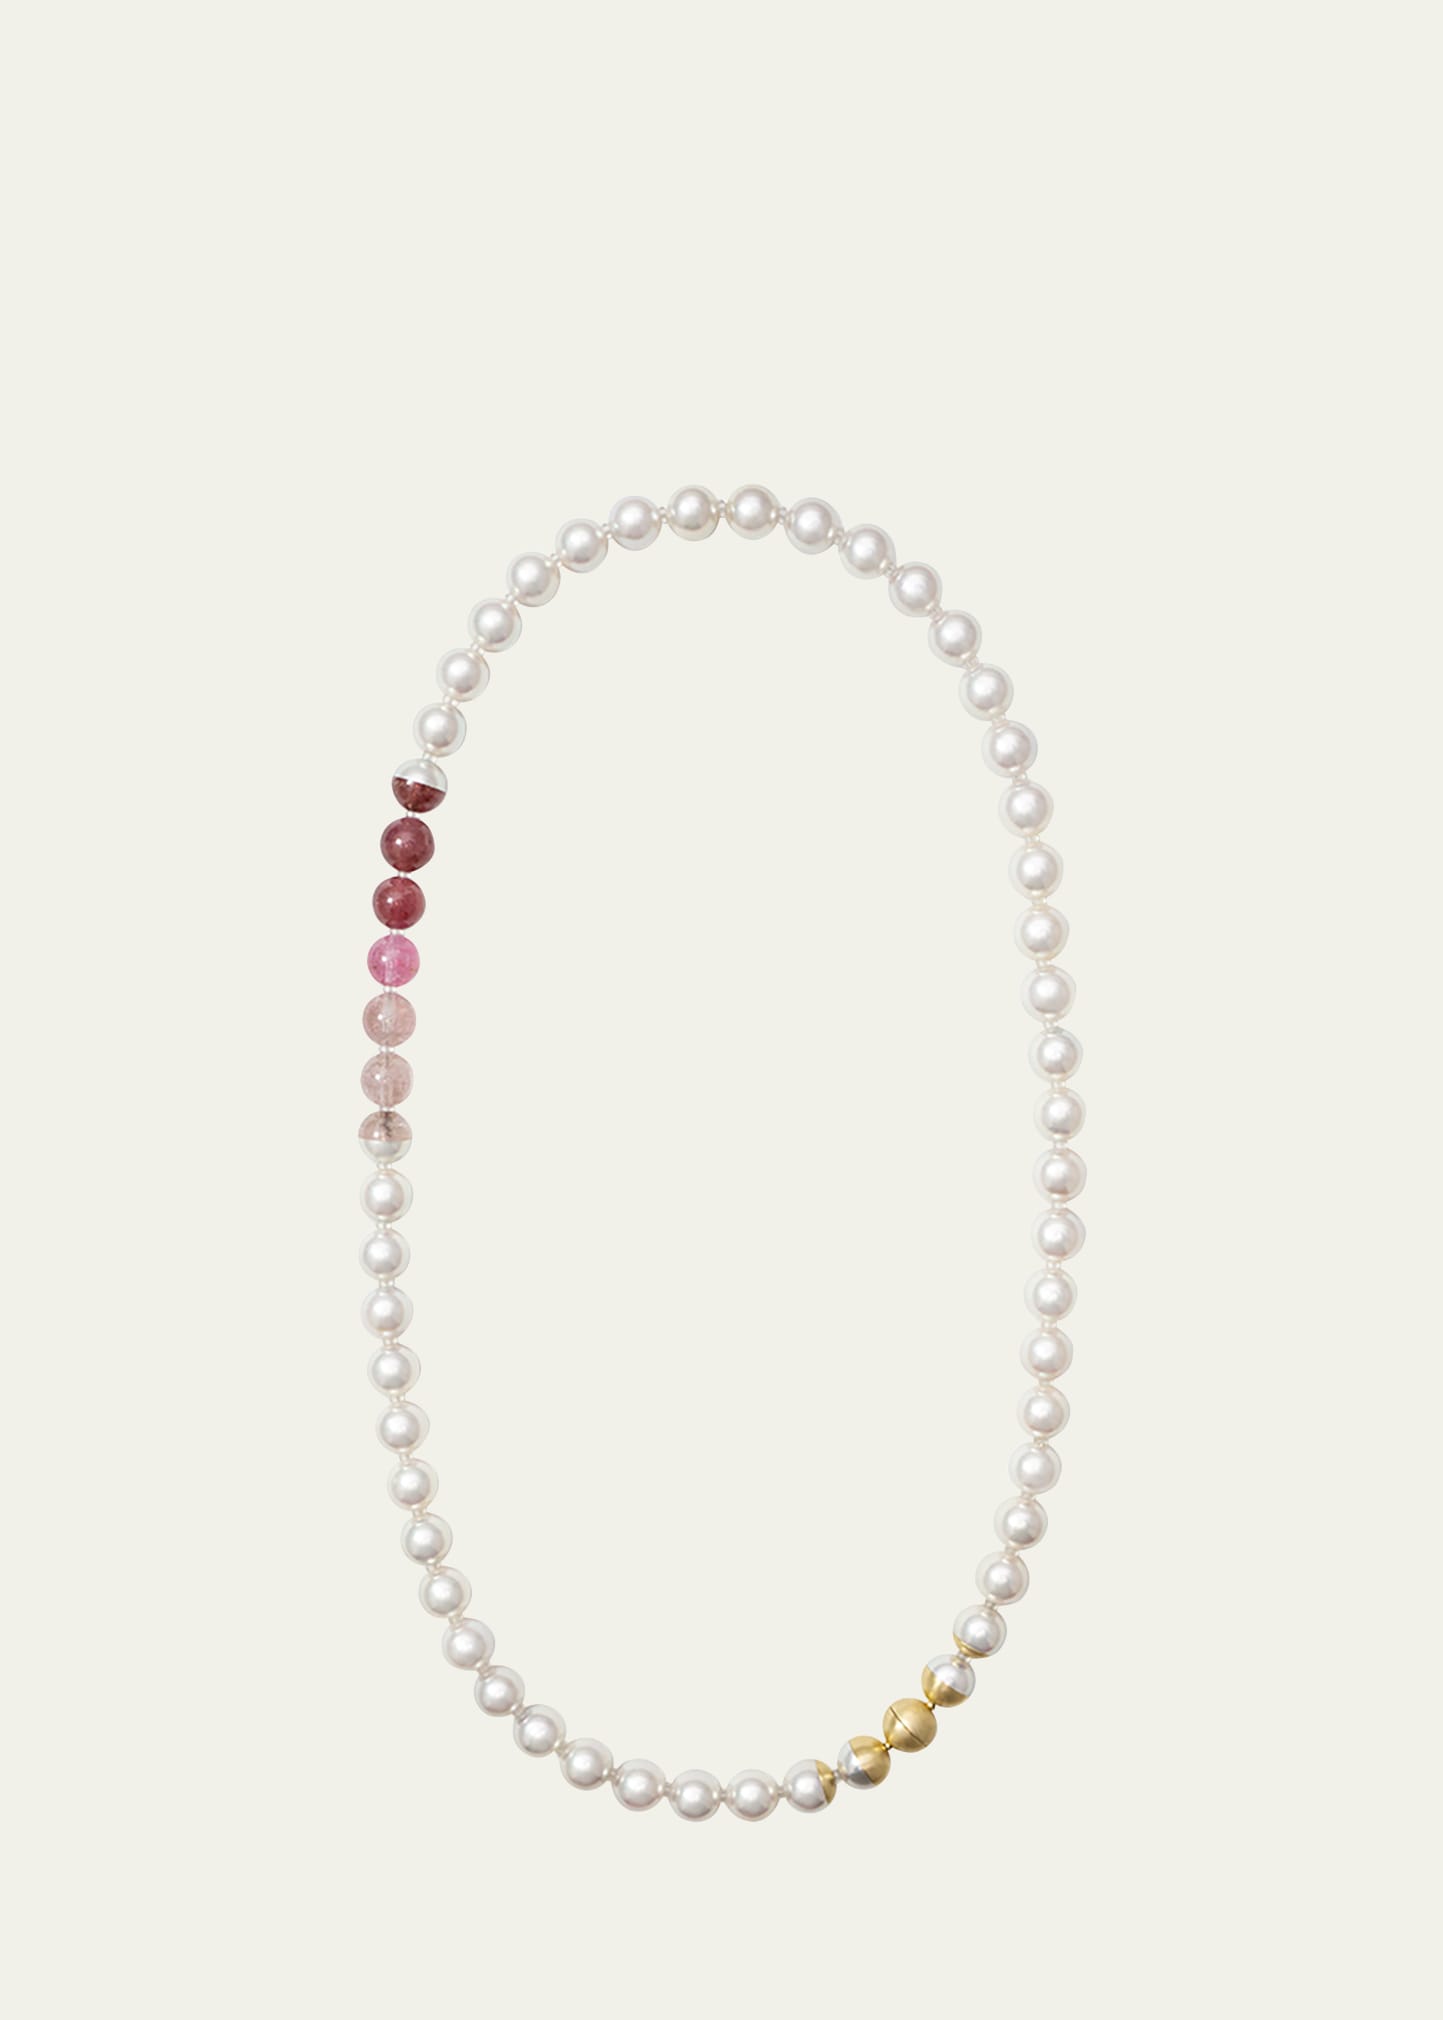 Yutai 18k Yellow Gold Sectional Pearl Necklace With Tourmaline And Cultured Akoya Pearls In Metallic